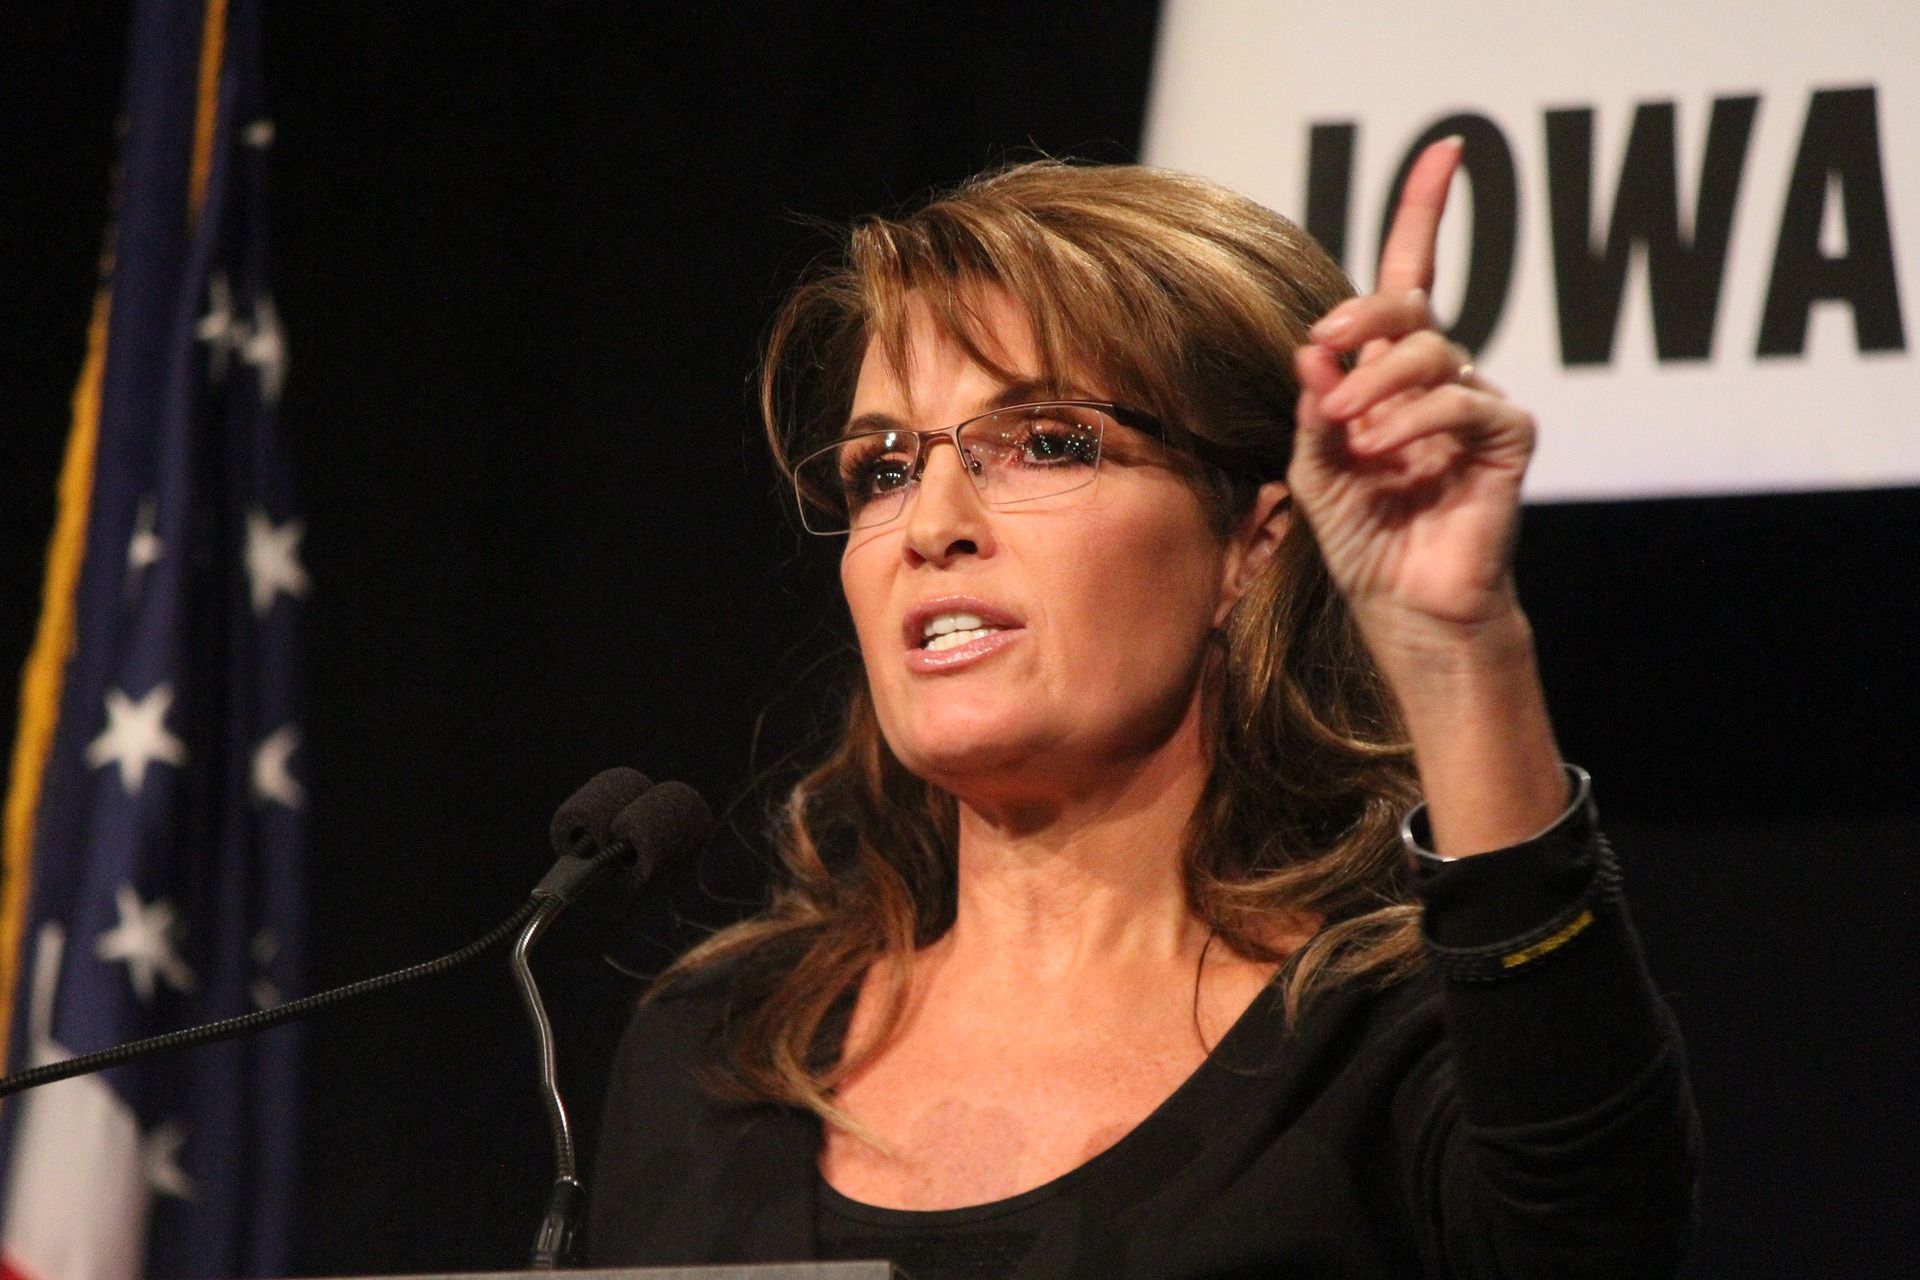 Will take COVID vaccine ‘over my dead body’, says Sarah Palin